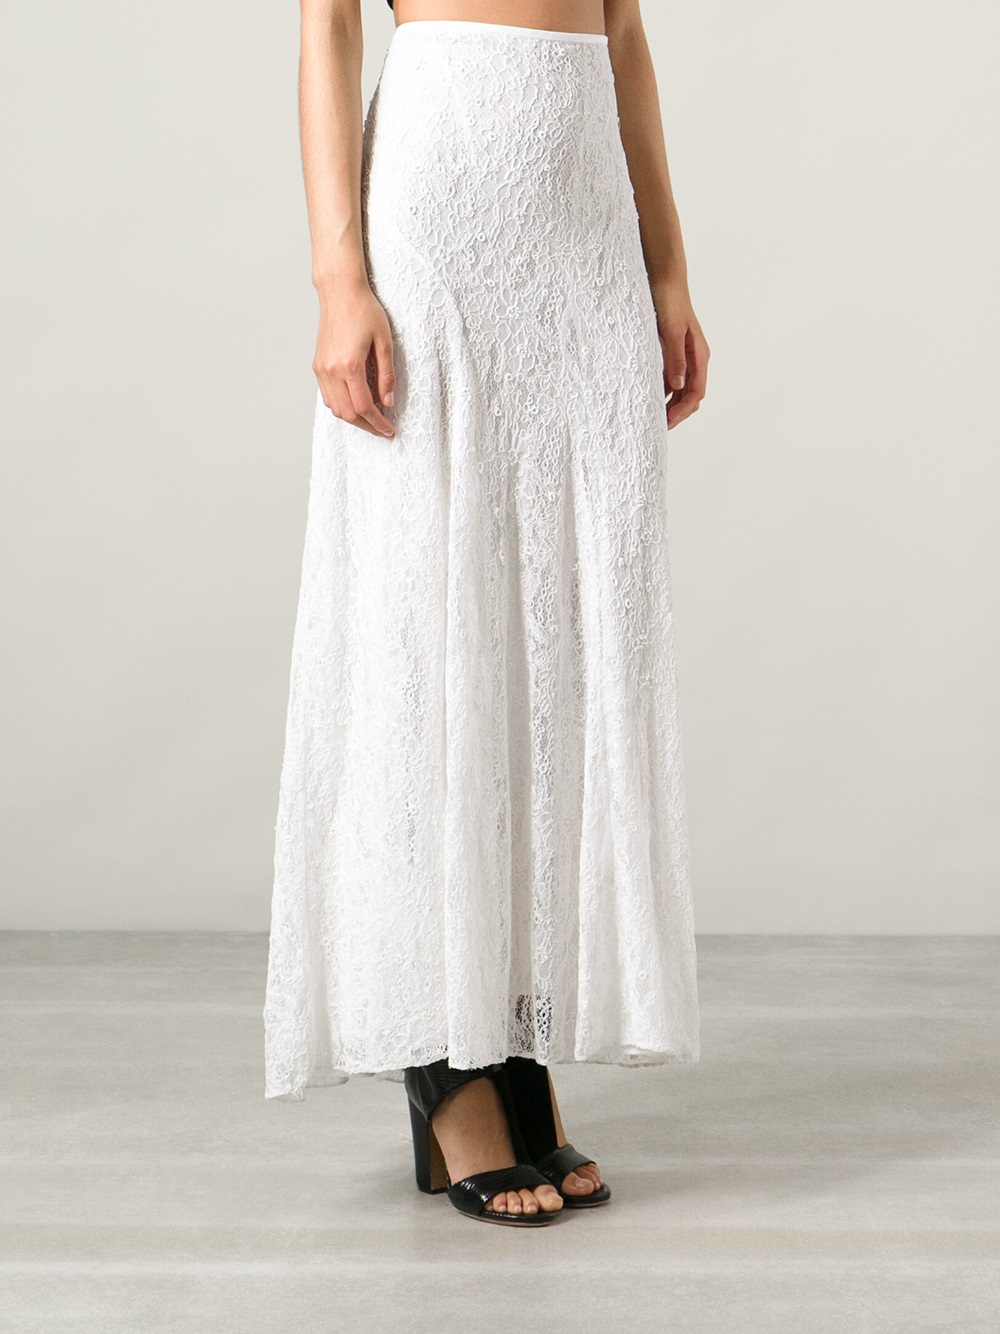 Isabel Marant Floral Lace Maxi Skirt in White - Lyst